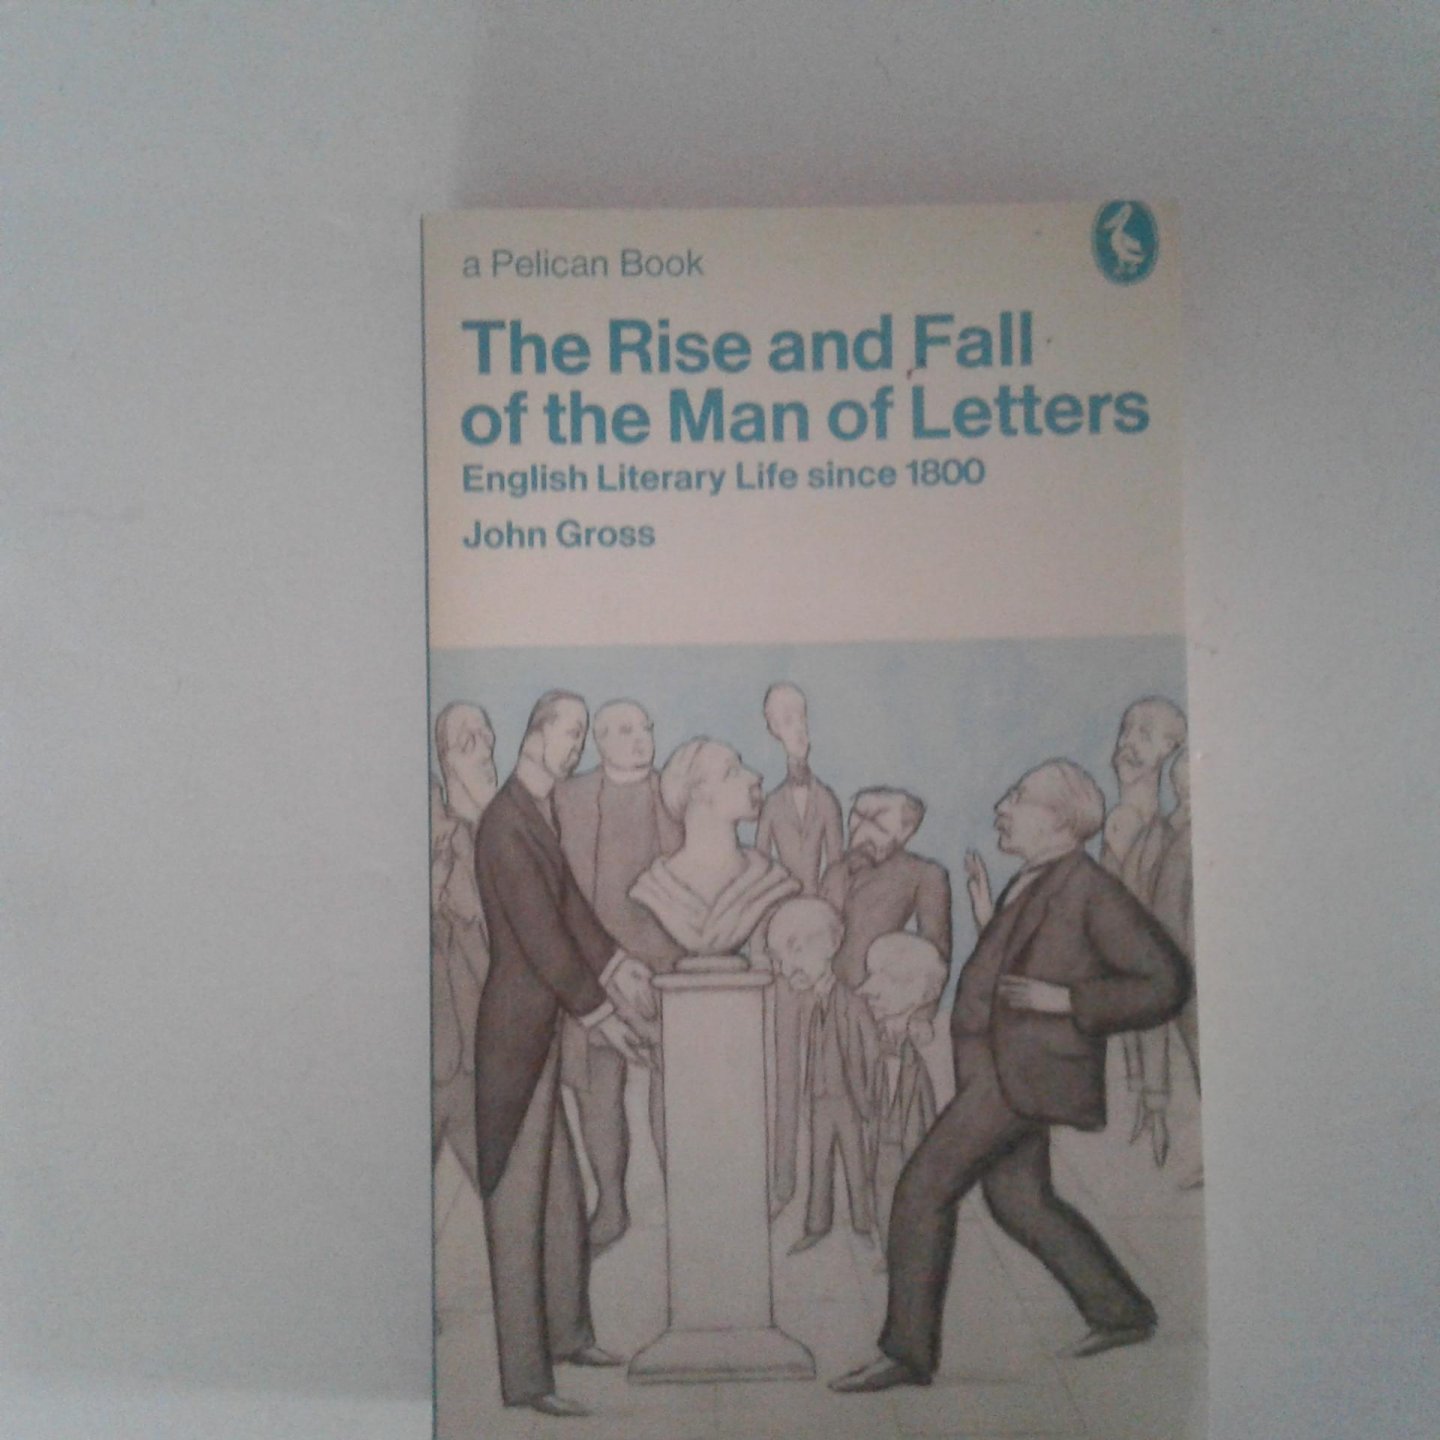 Gross, John - The Rise and Fall of the Man of Letters ; Aspects of English Literary Life since 1800